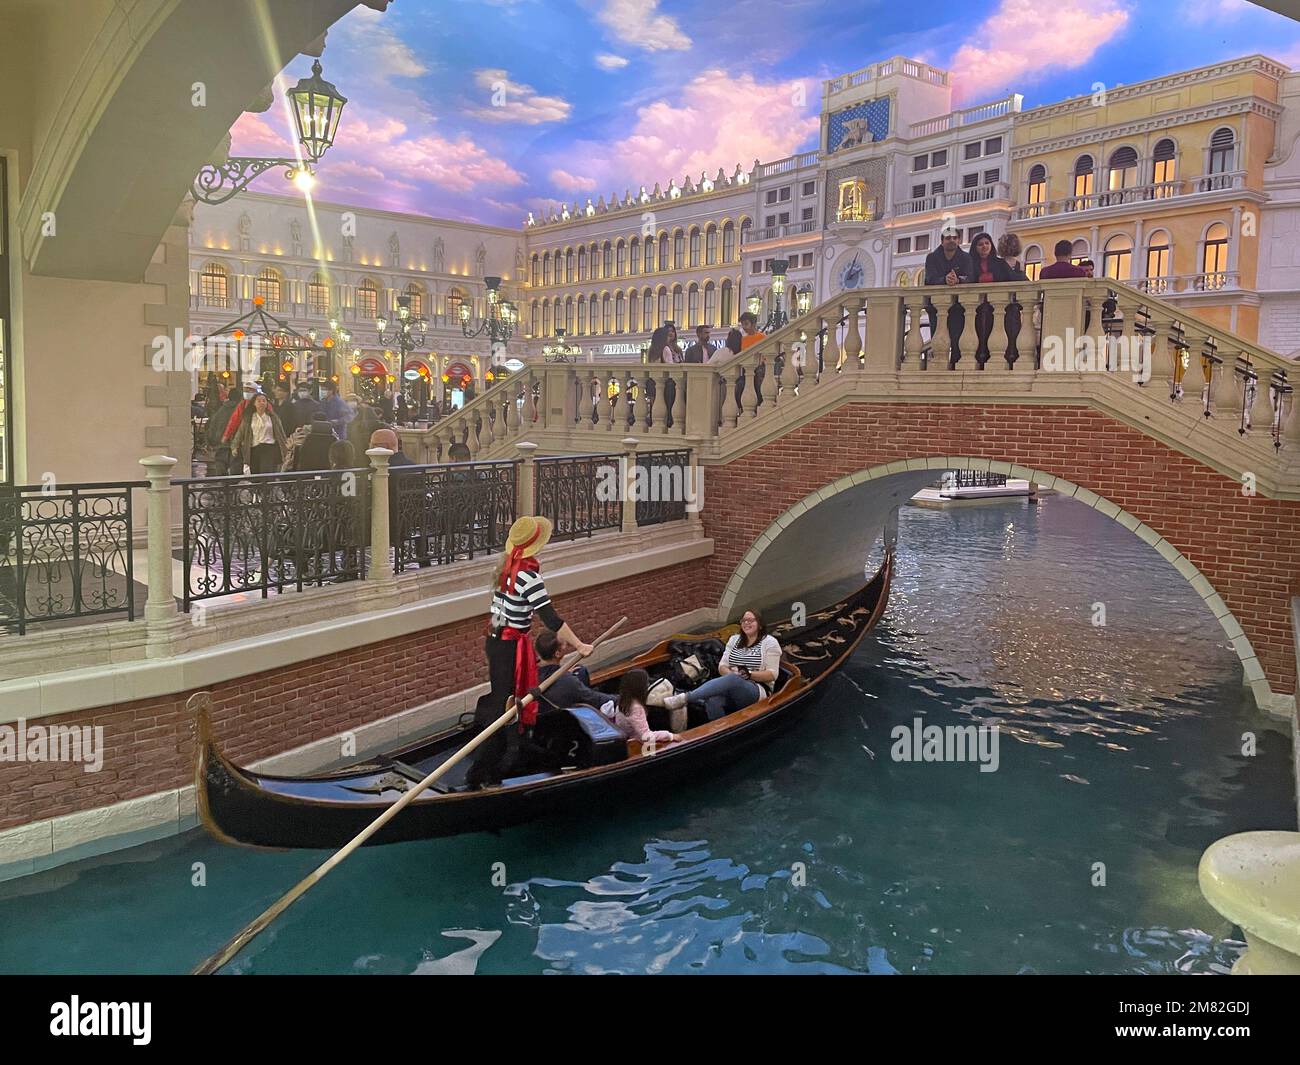 Gondolier and canal in the Venetian Hotel, Las Vegas, Nevada, USA Stock Photo